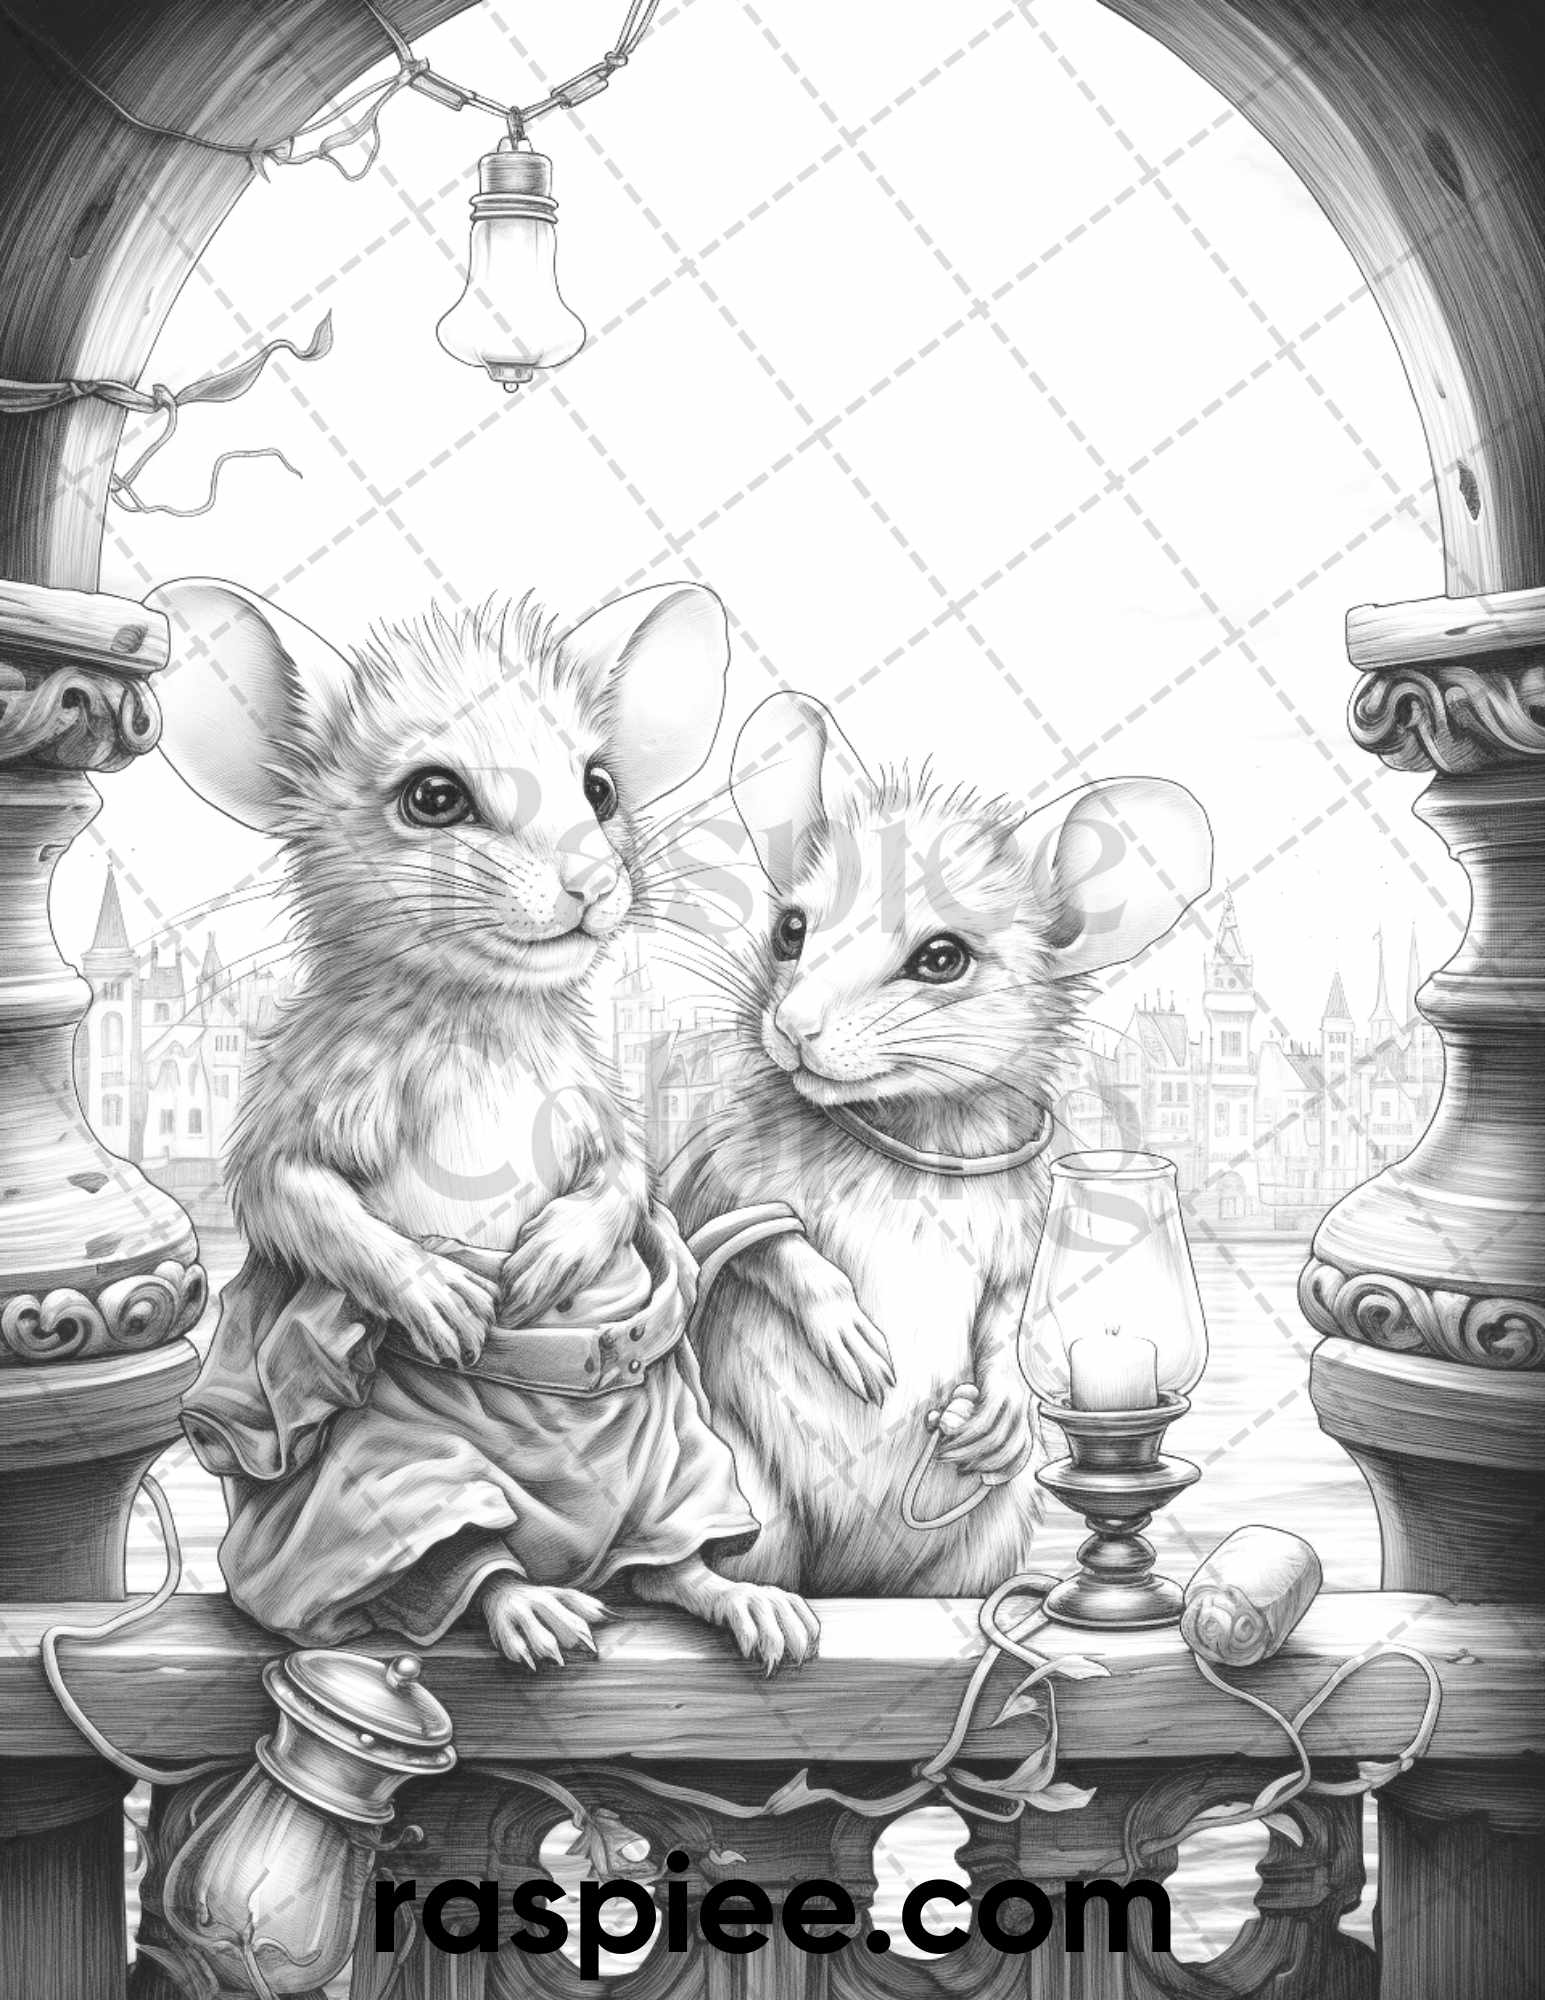 Fairytale Mice Coloring Pages, Grayscale Mouse Art, Printable Adult Coloring, Stress-Relief Mouse Illustrations, DIY Fairy Tale Coloring, Fantasy Coloring Pages, Grayscale Coloring Pages